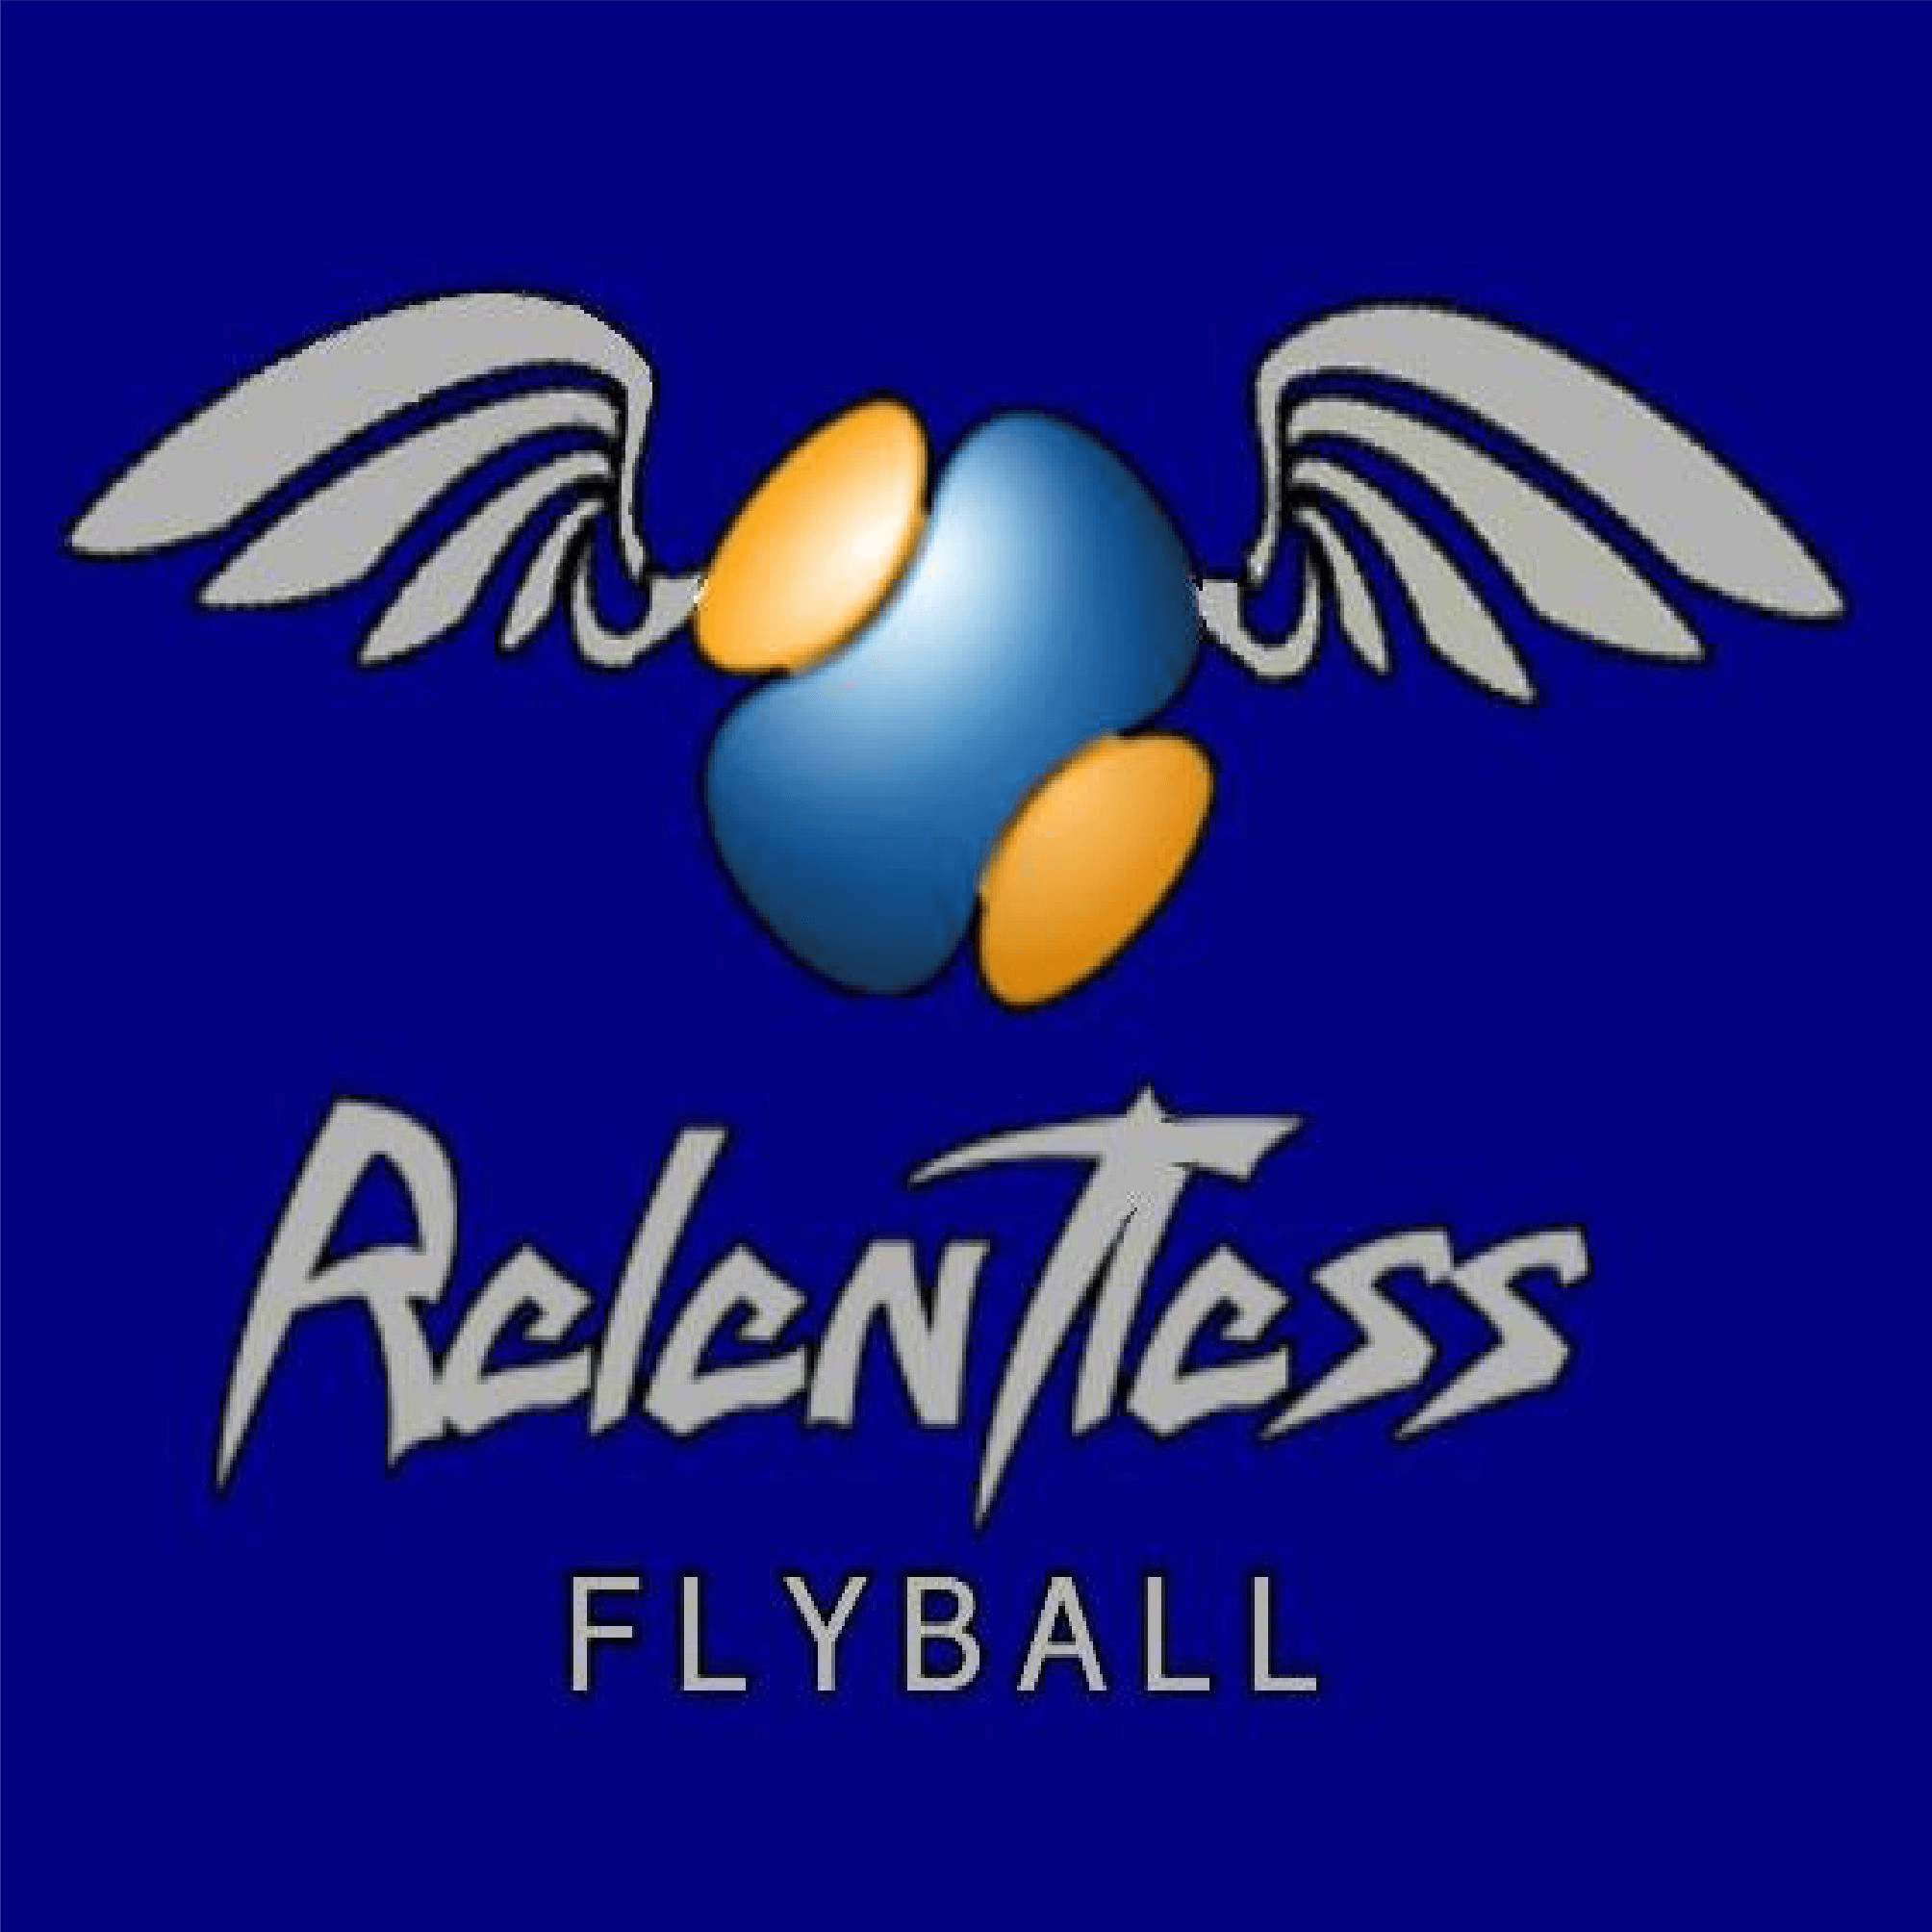 Relentless_Flyball logo sigma embroidery